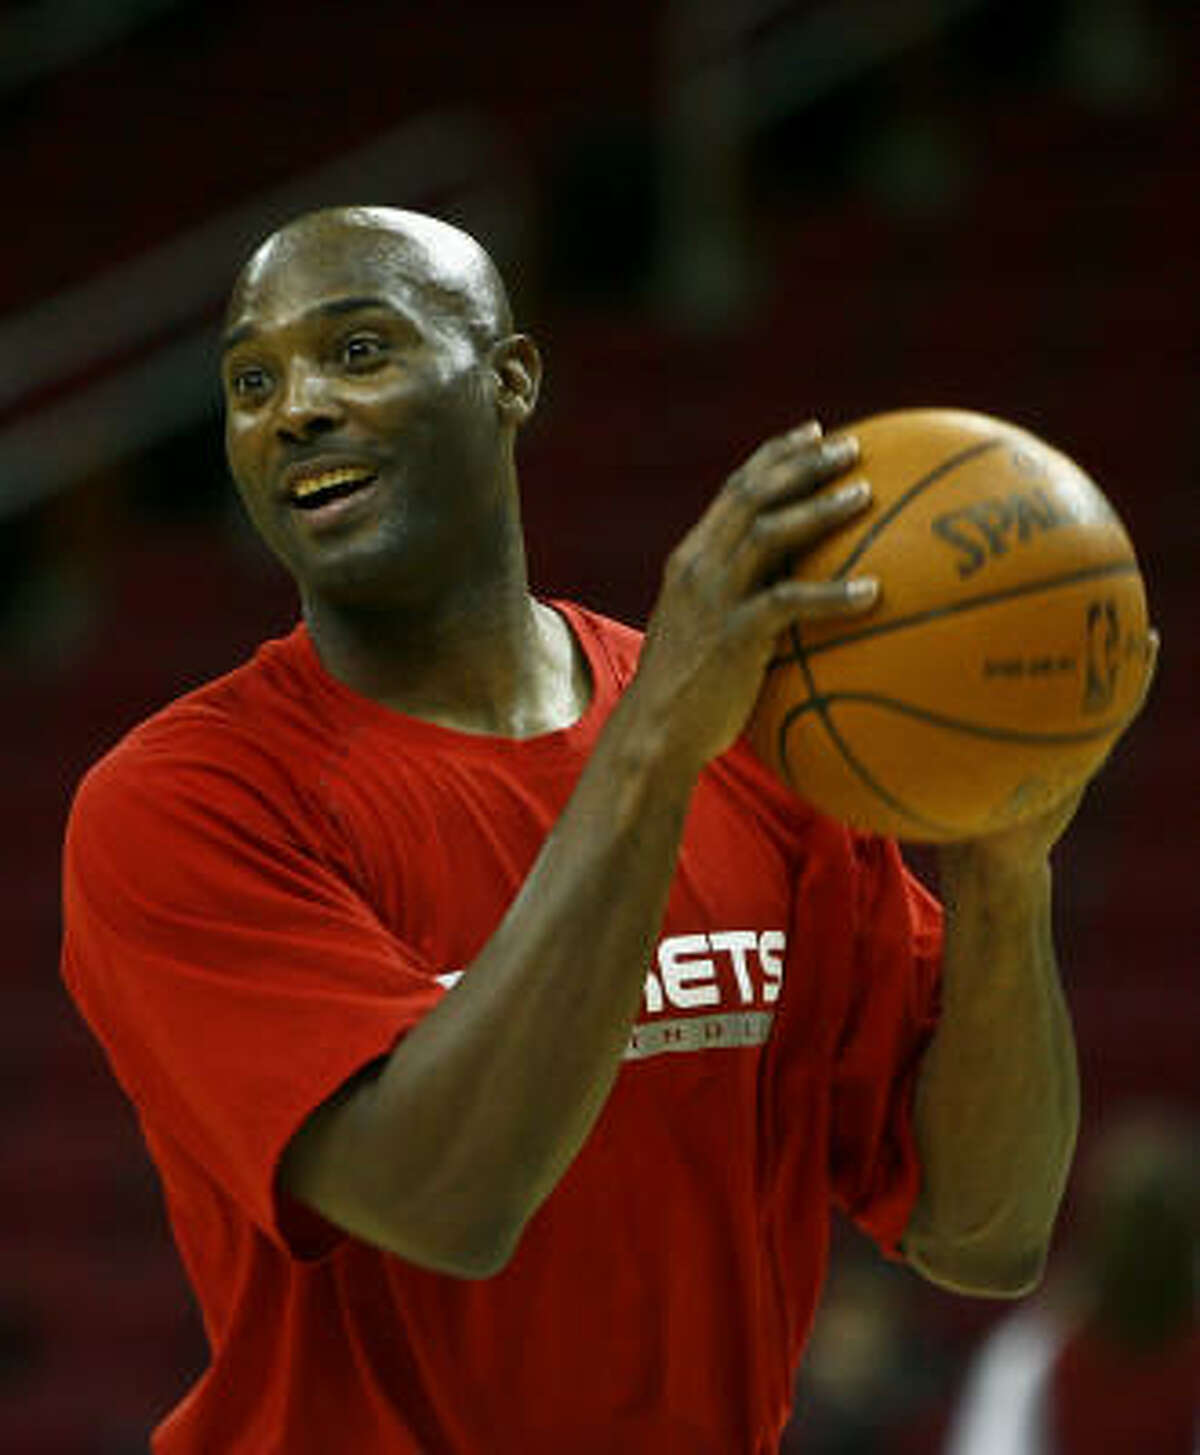 Rockets director of player programs, Shawn Respert, a cancer survivor, did not reveal his condition publicly until he retired as a player.